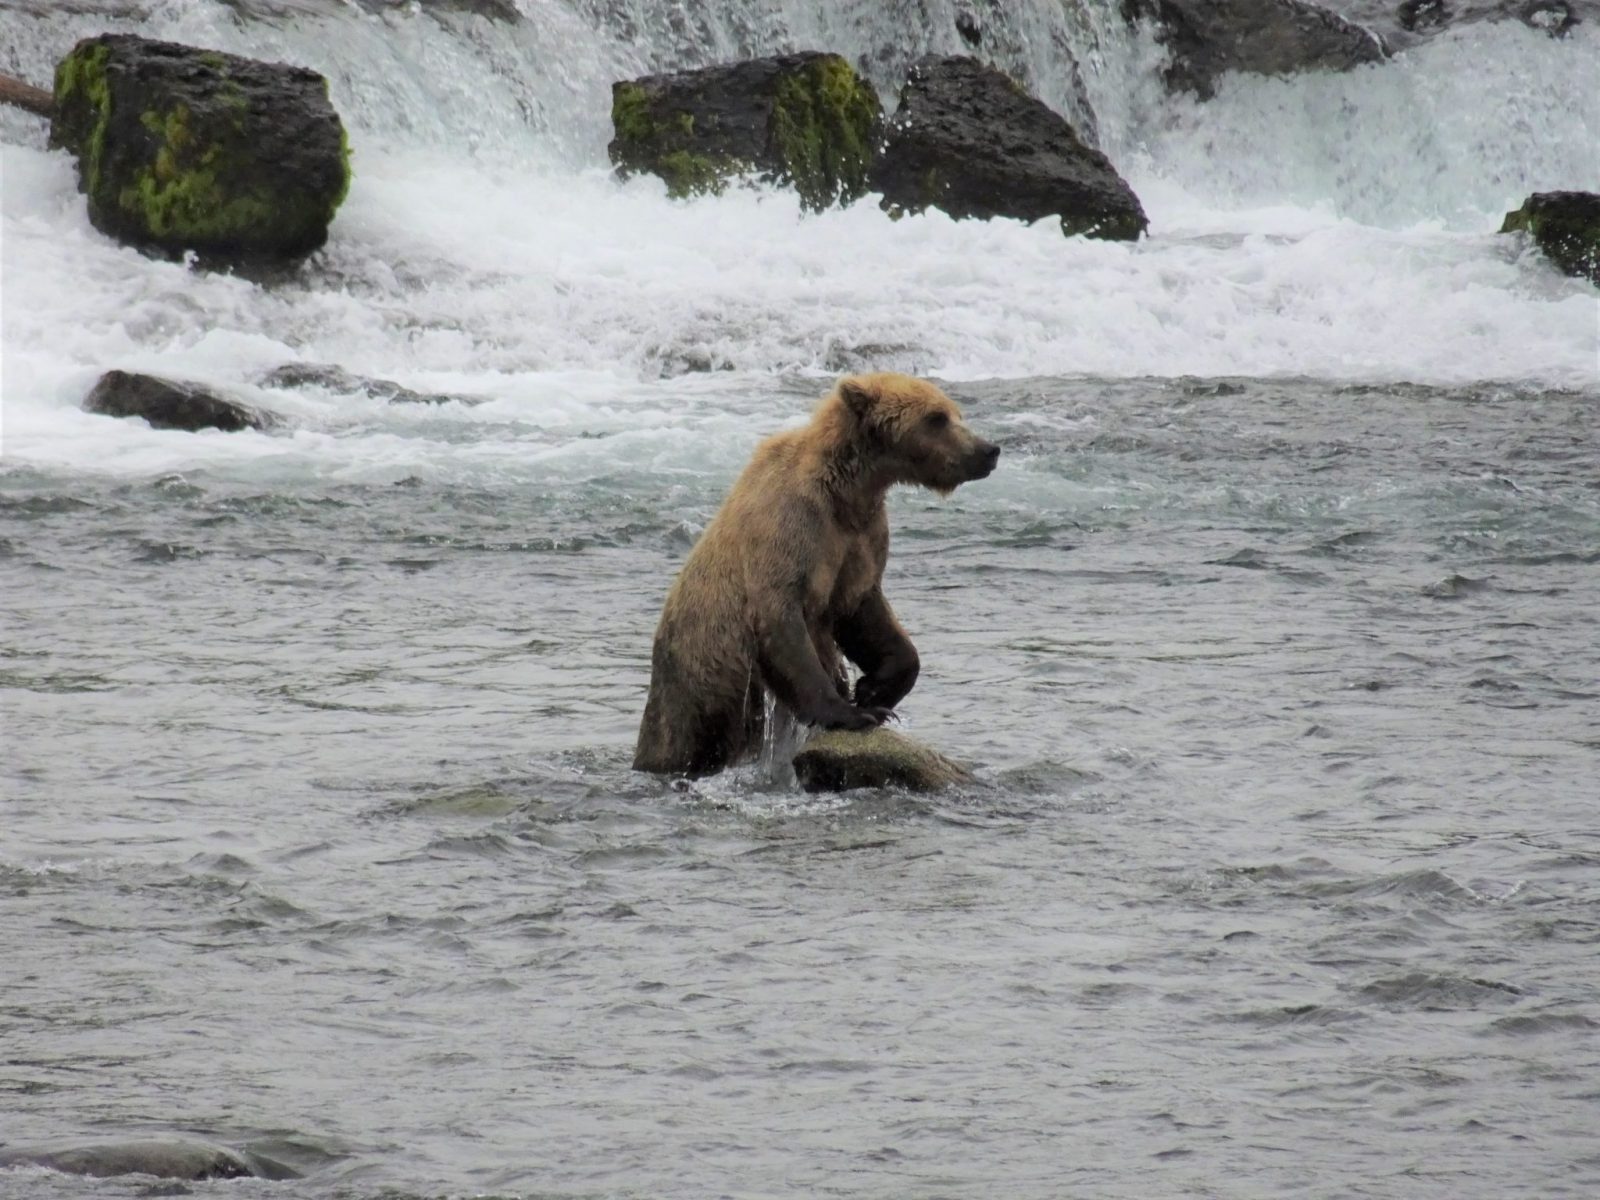 A brown bear standing in the rapids of a river in Katmai National Park in Alaska